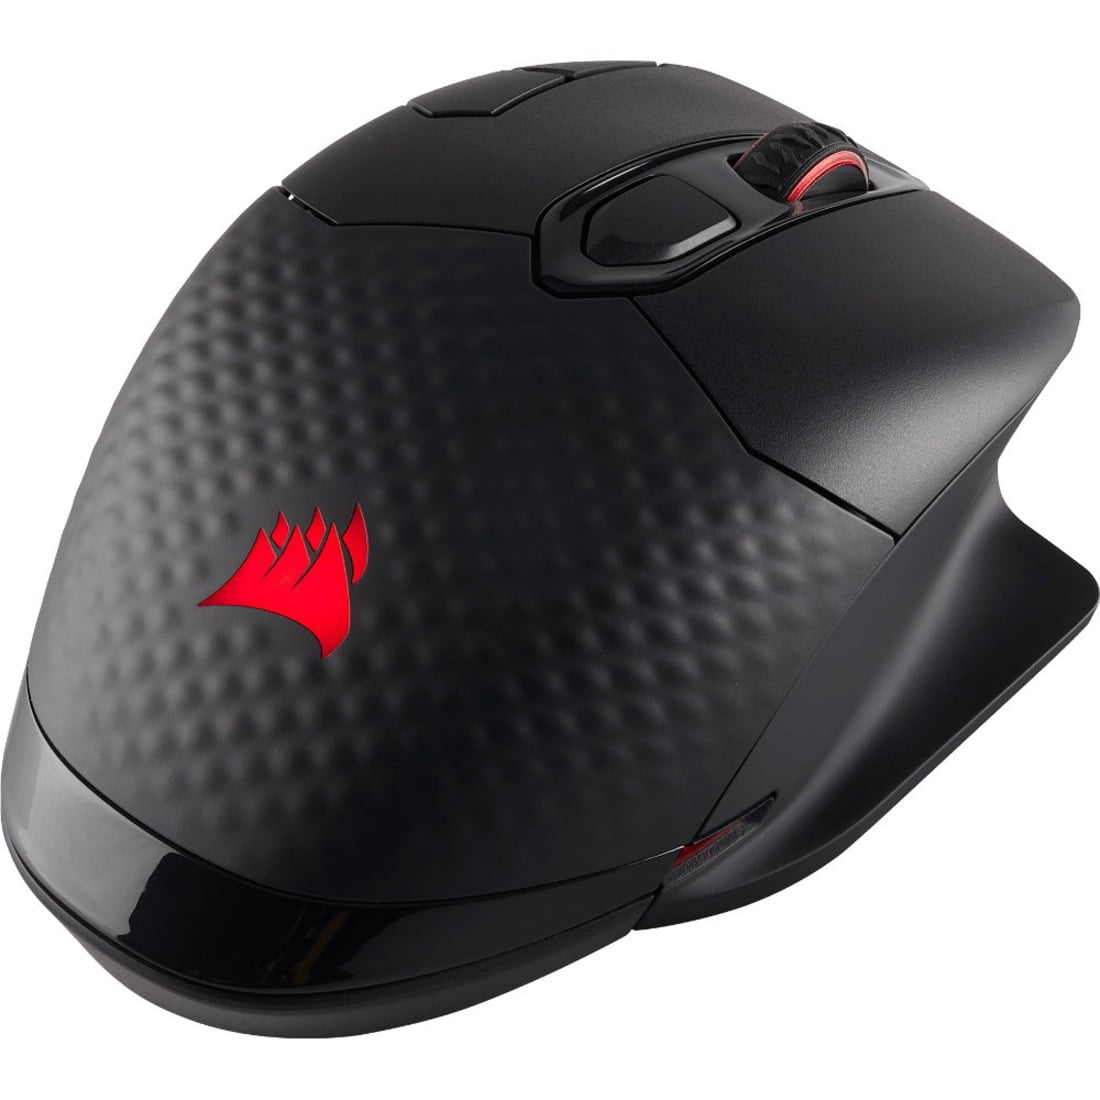 CORE Performance Wired / Wireless Gaming Mouse - Walmart.com